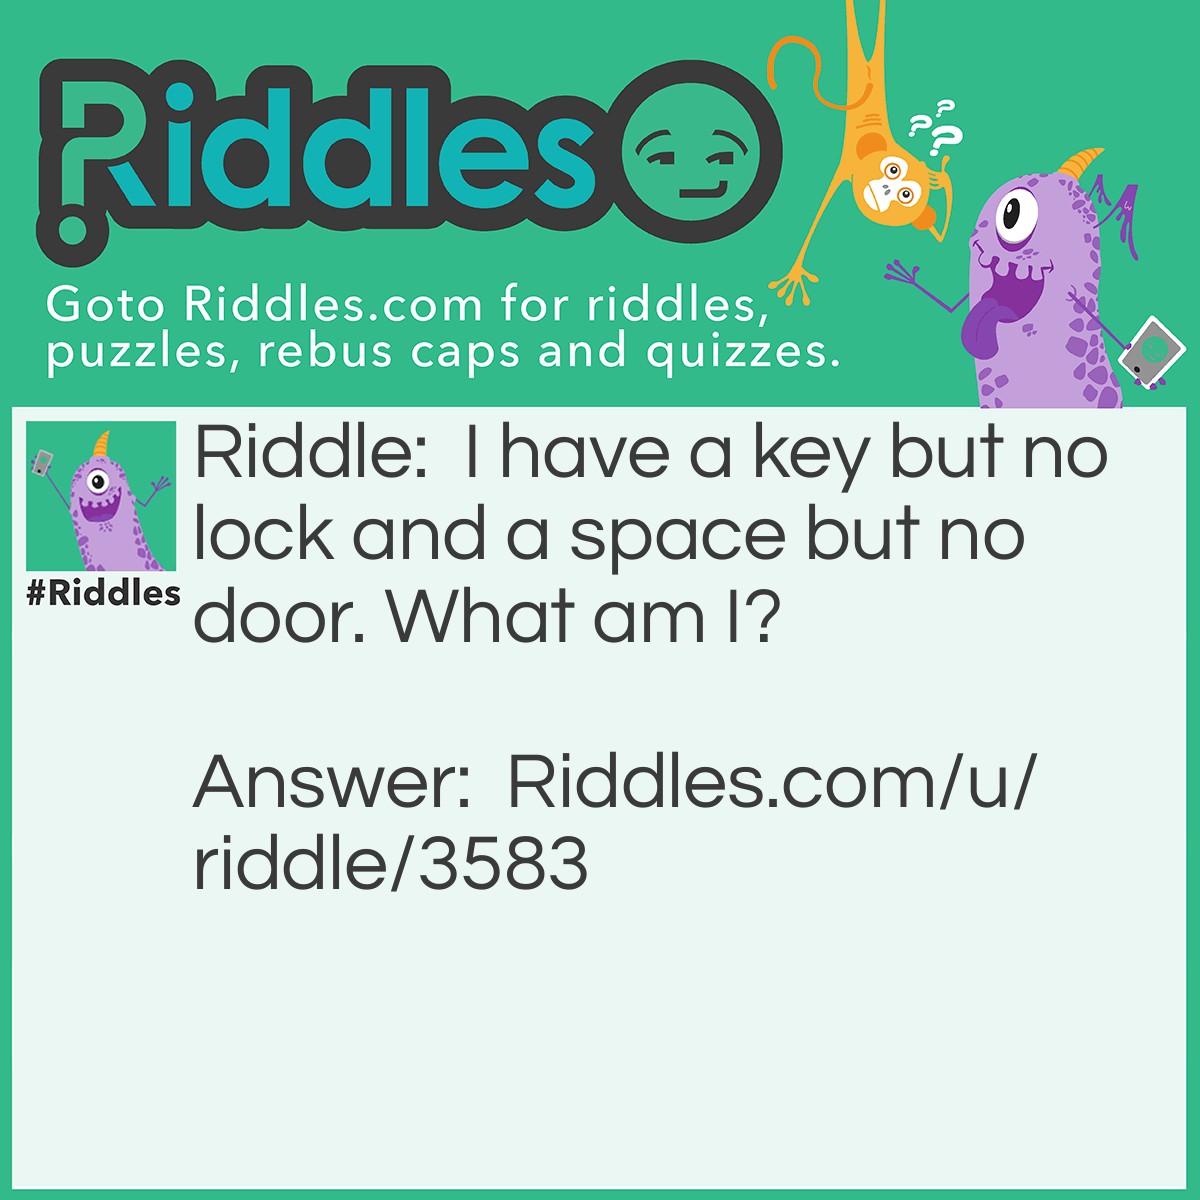 Riddle: I have a key but no lock and a space but no door. What am I? Answer: Keyboard.